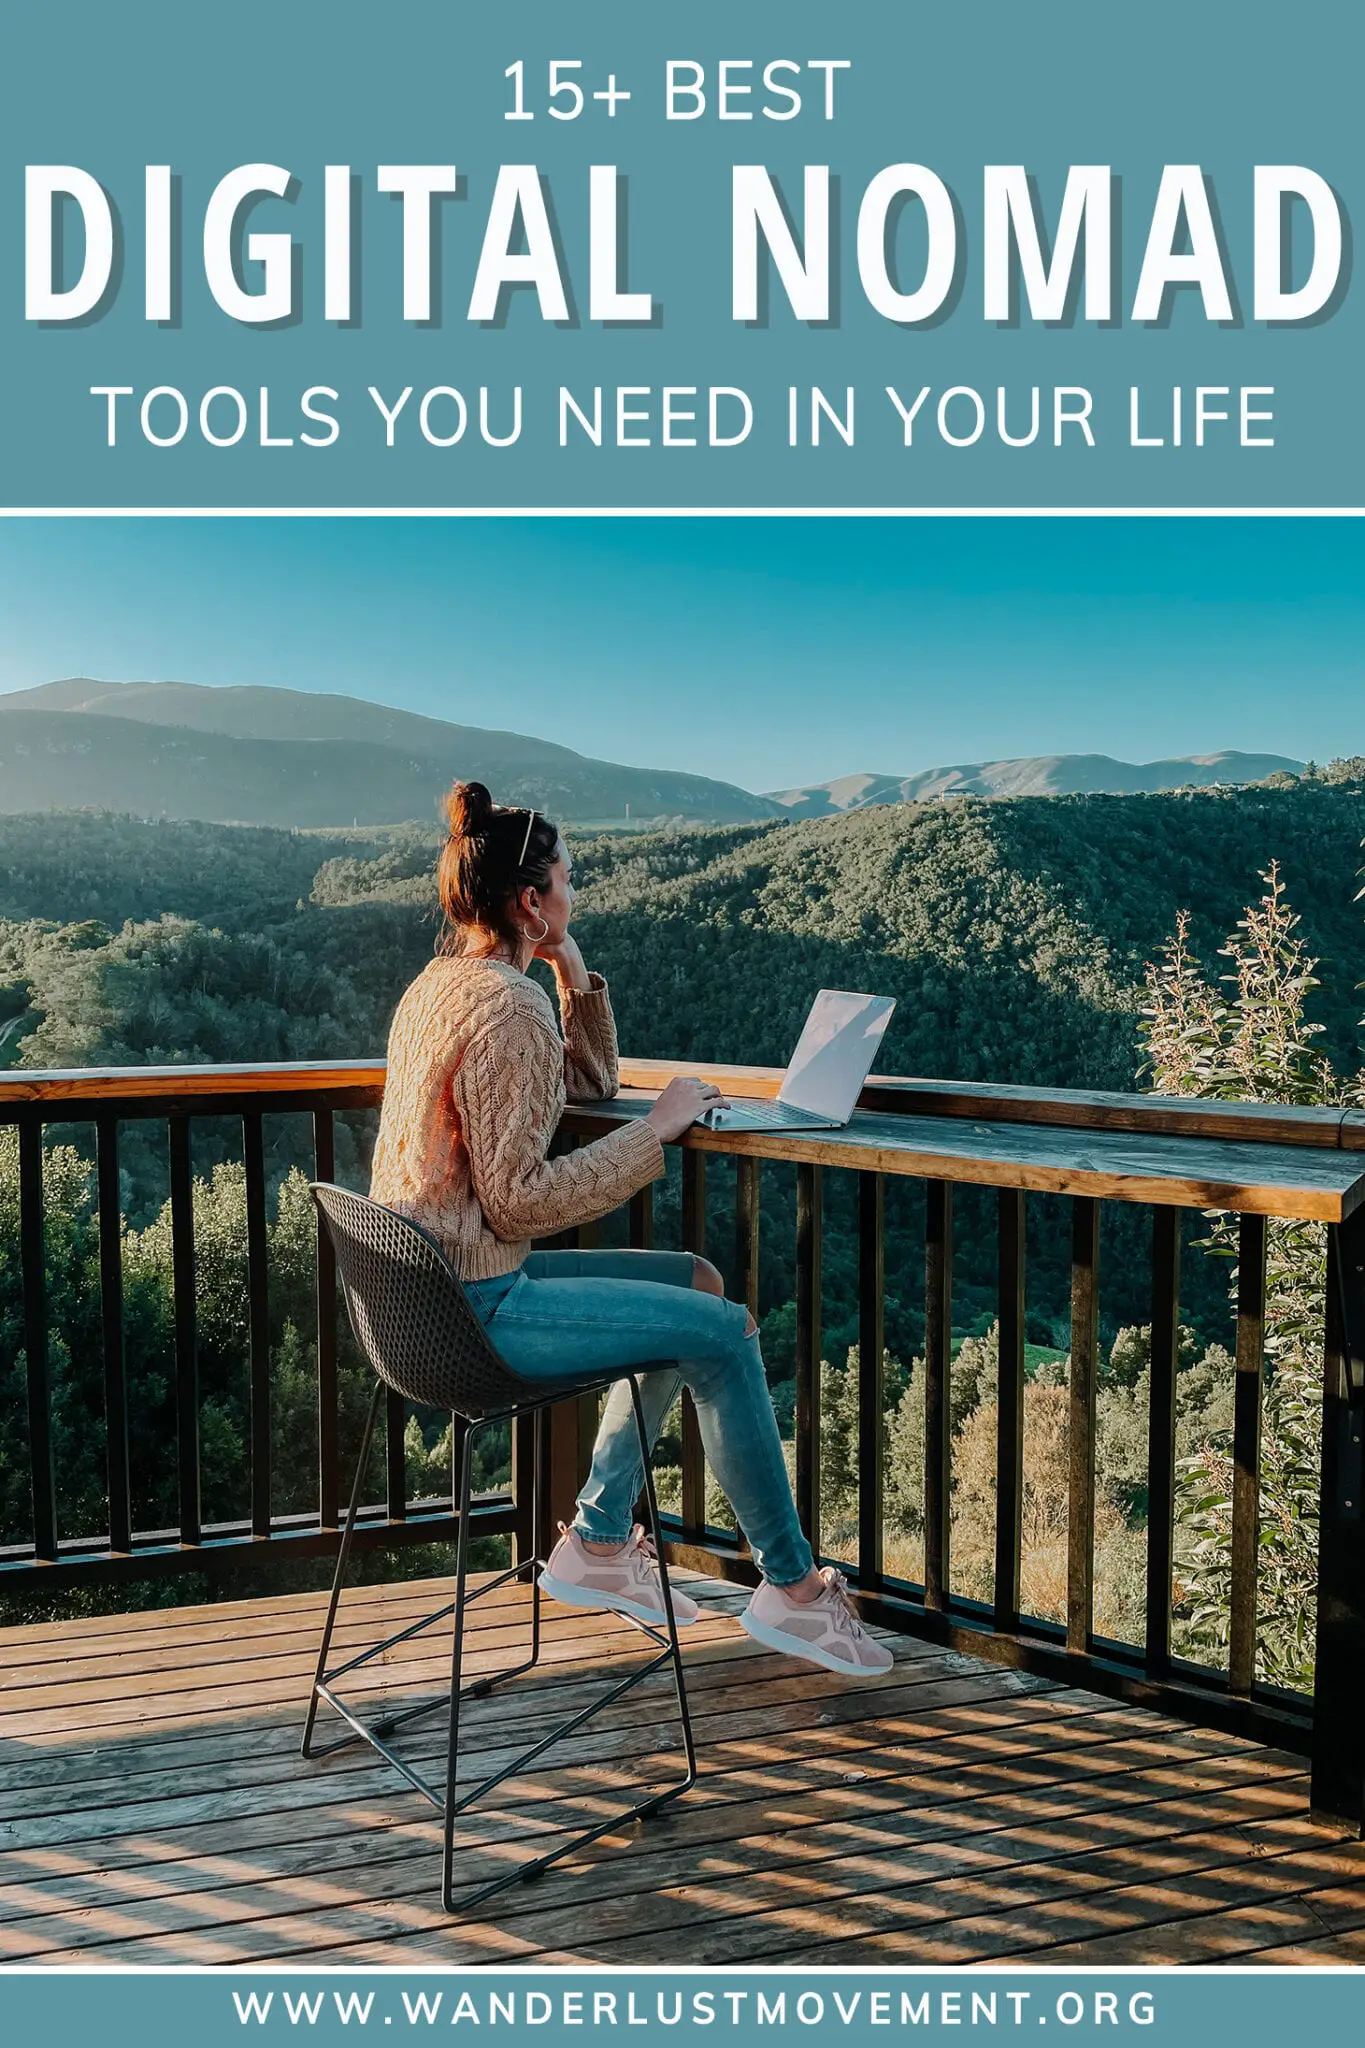 15+ Digital Nomad Tools You Need in Your Life